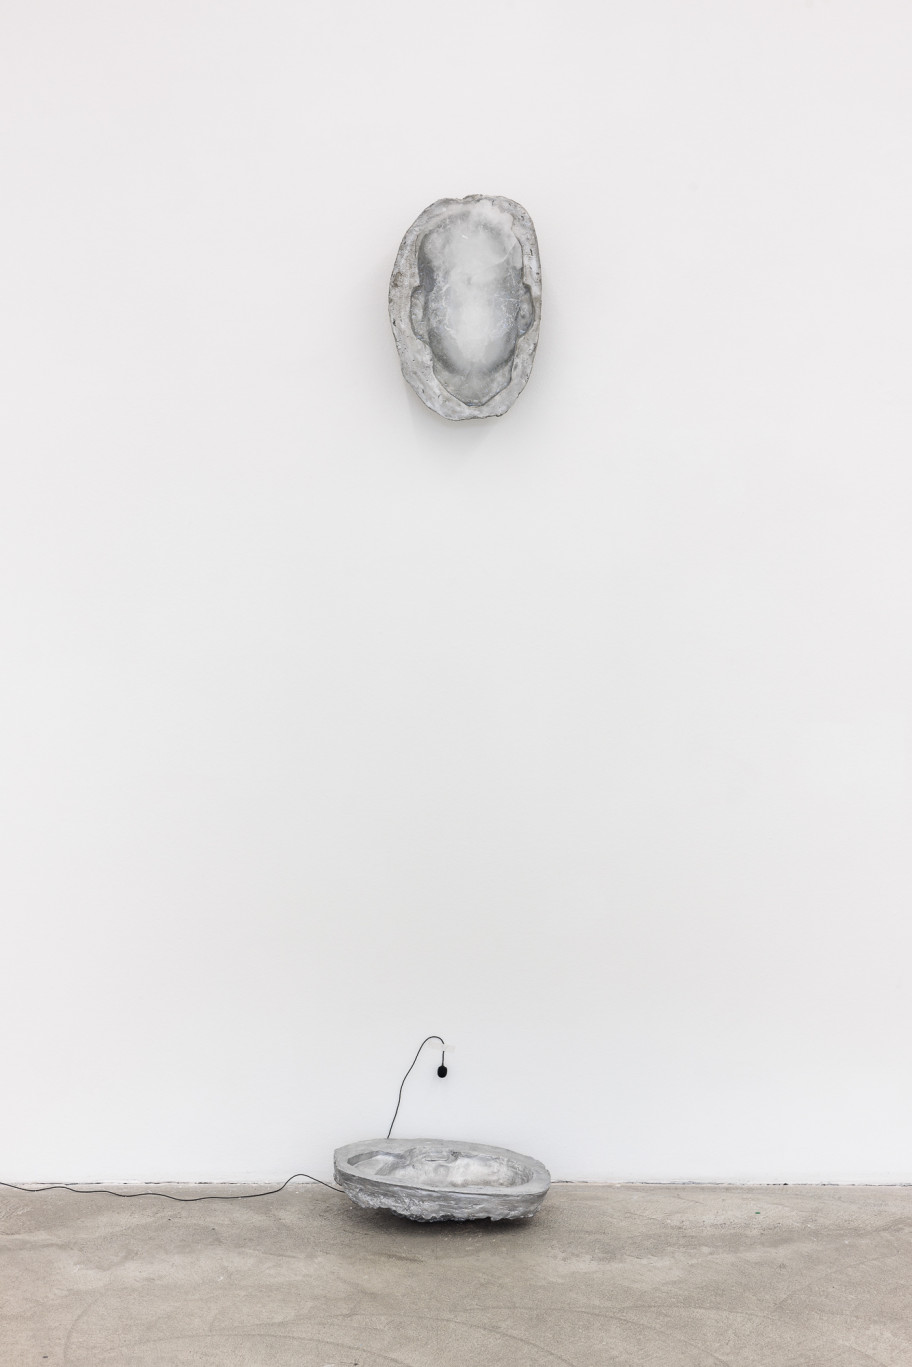 Tania Pérez Córdova Thinking, 2023 aluminium, melting ice; live transmission of the sound of the melting sculpture, microphone, cable, mixer, speakers each cast 42 x 29 x 11 cm, overall dimensions 175 x 40 x 30 cm 